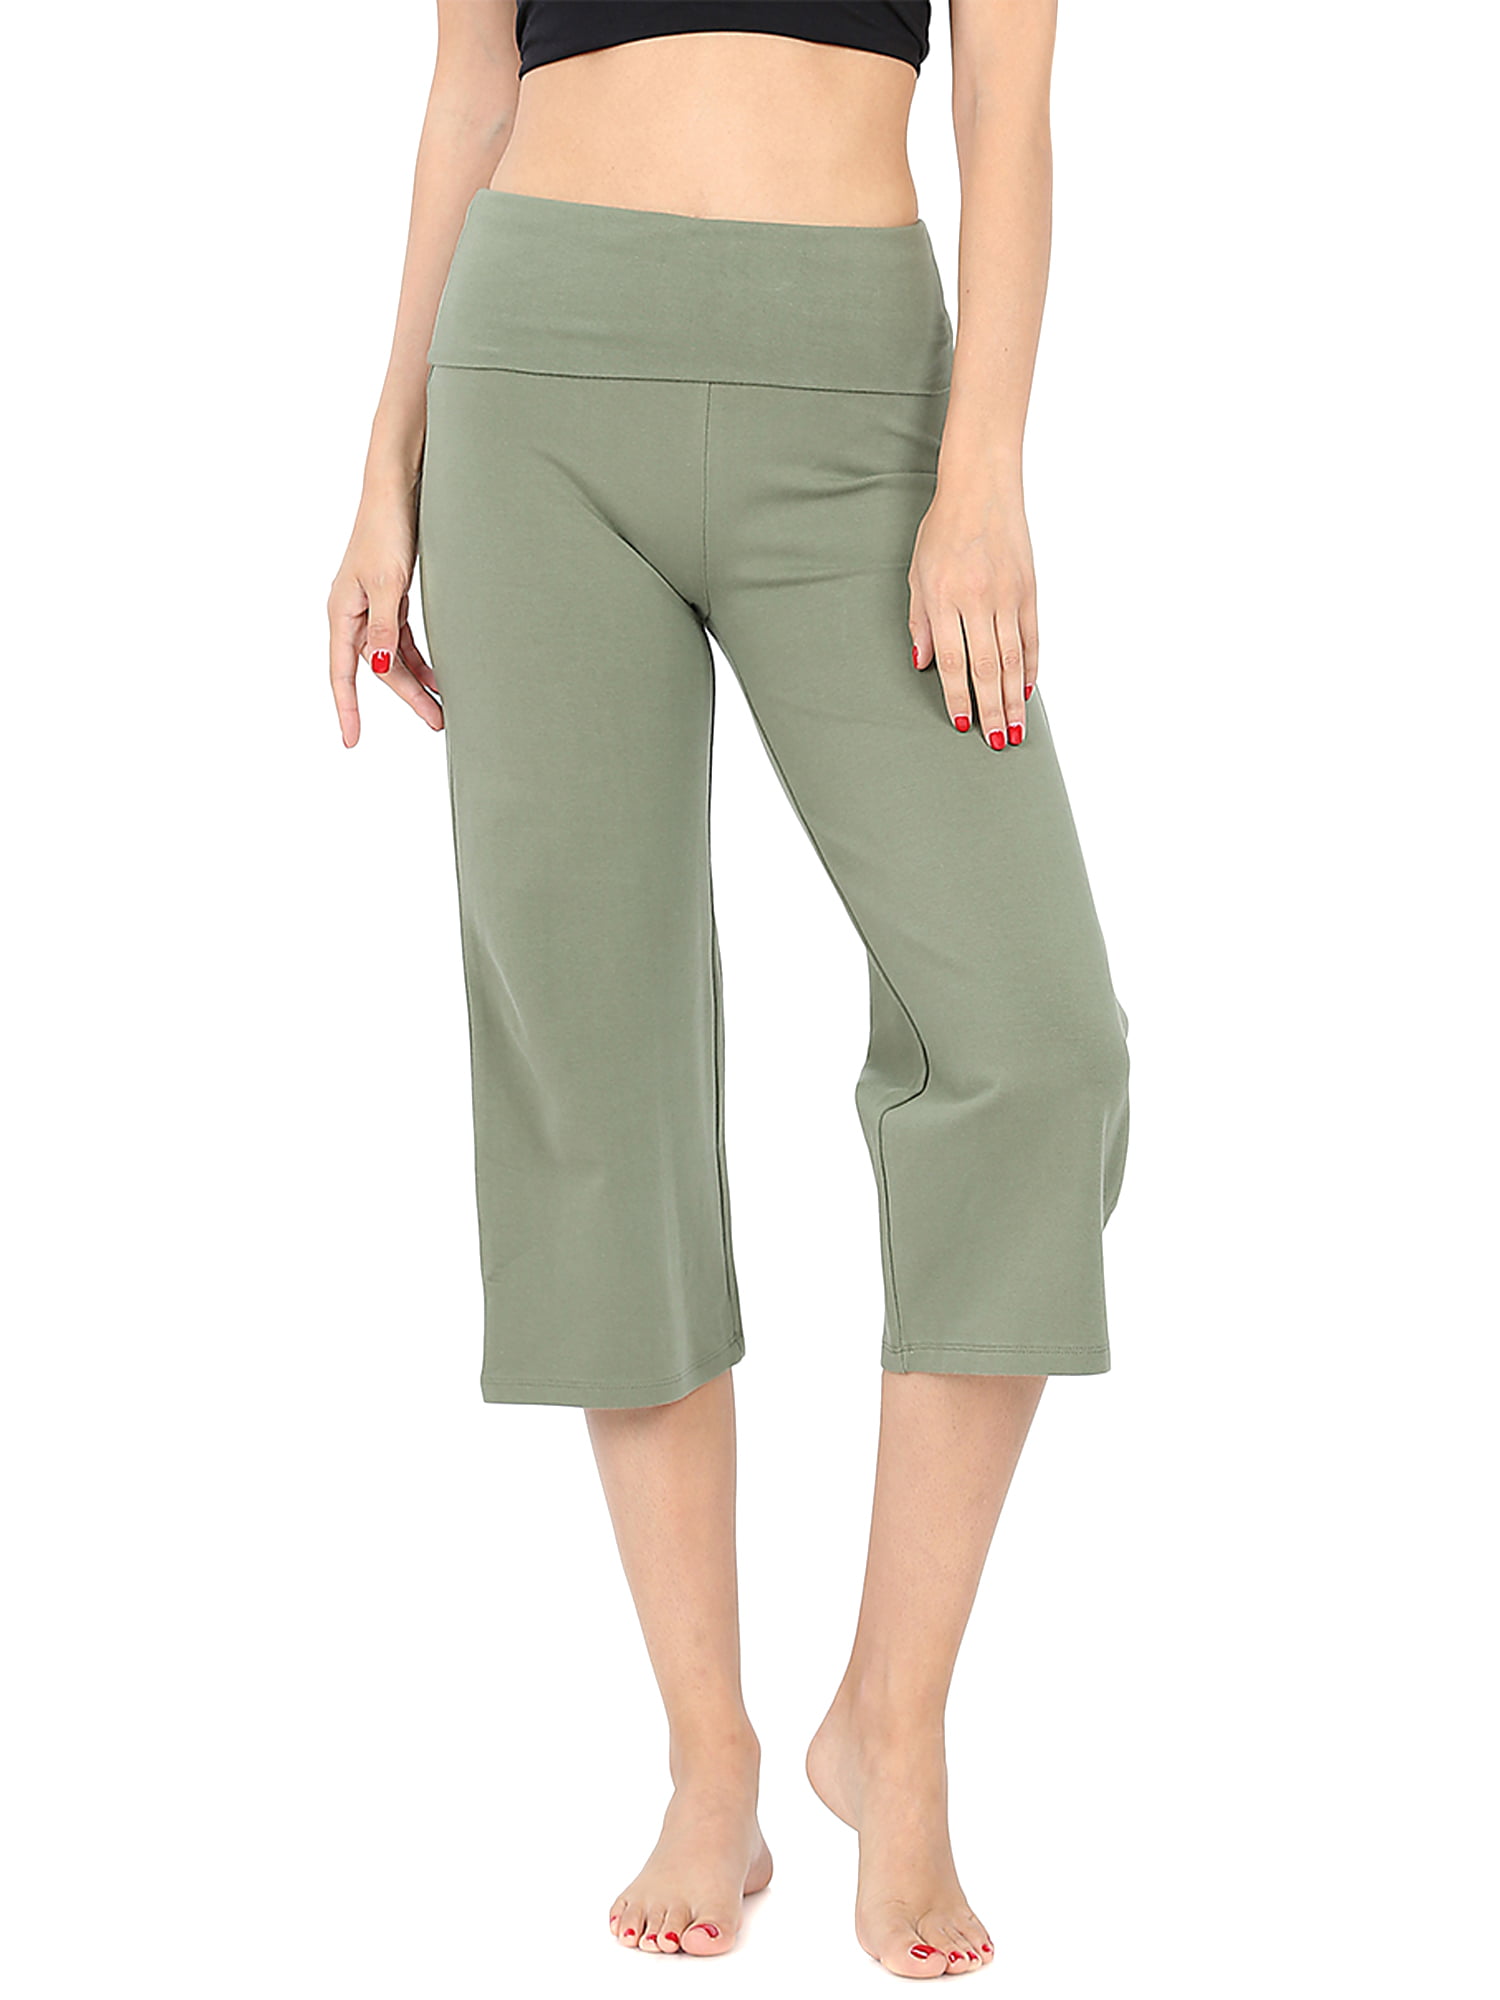 Cotton Yoga Capri Pants For Women  International Society of Precision  Agriculture